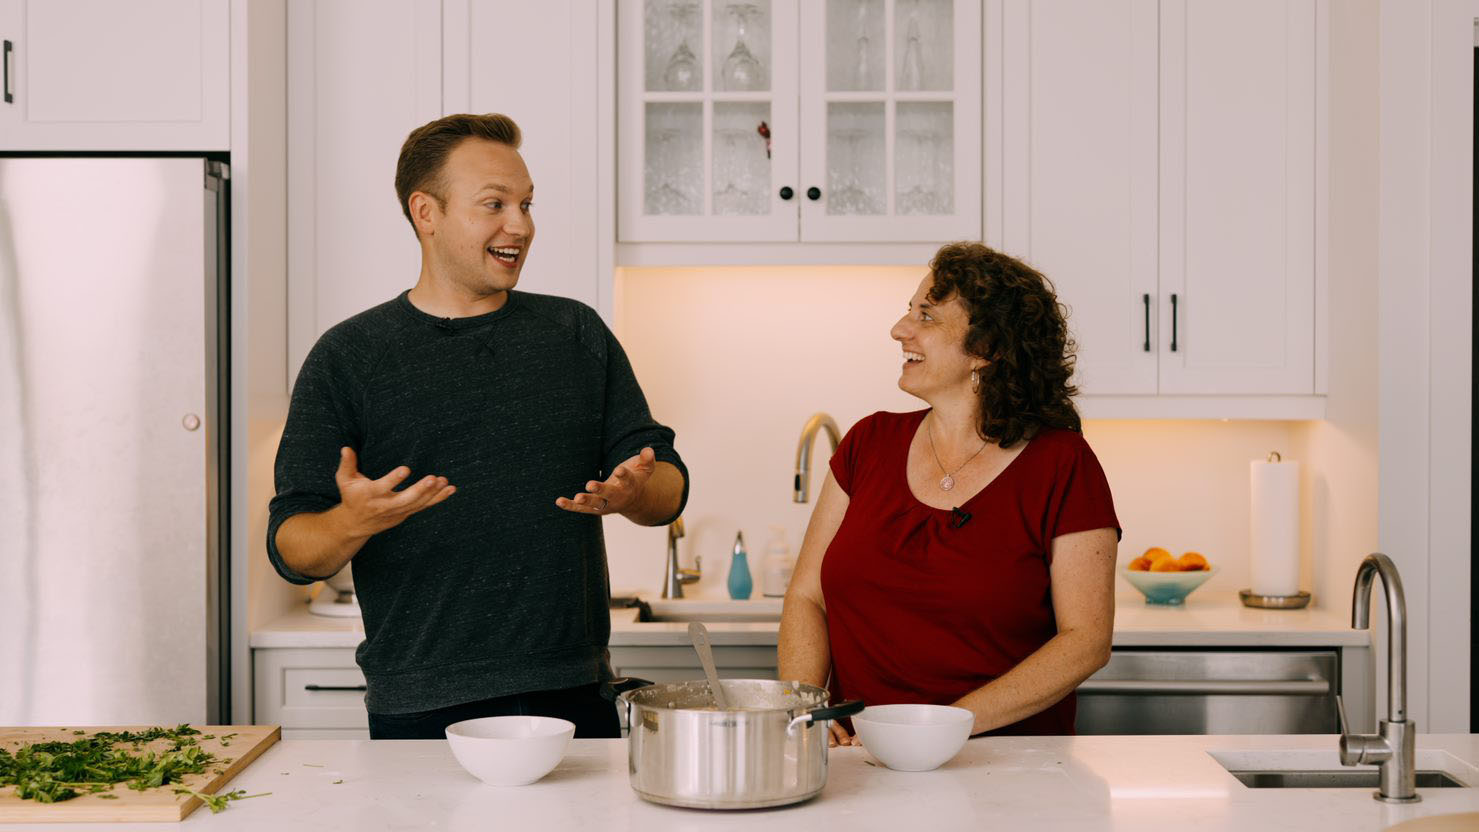 A man and a woman laughing together in a kitchen